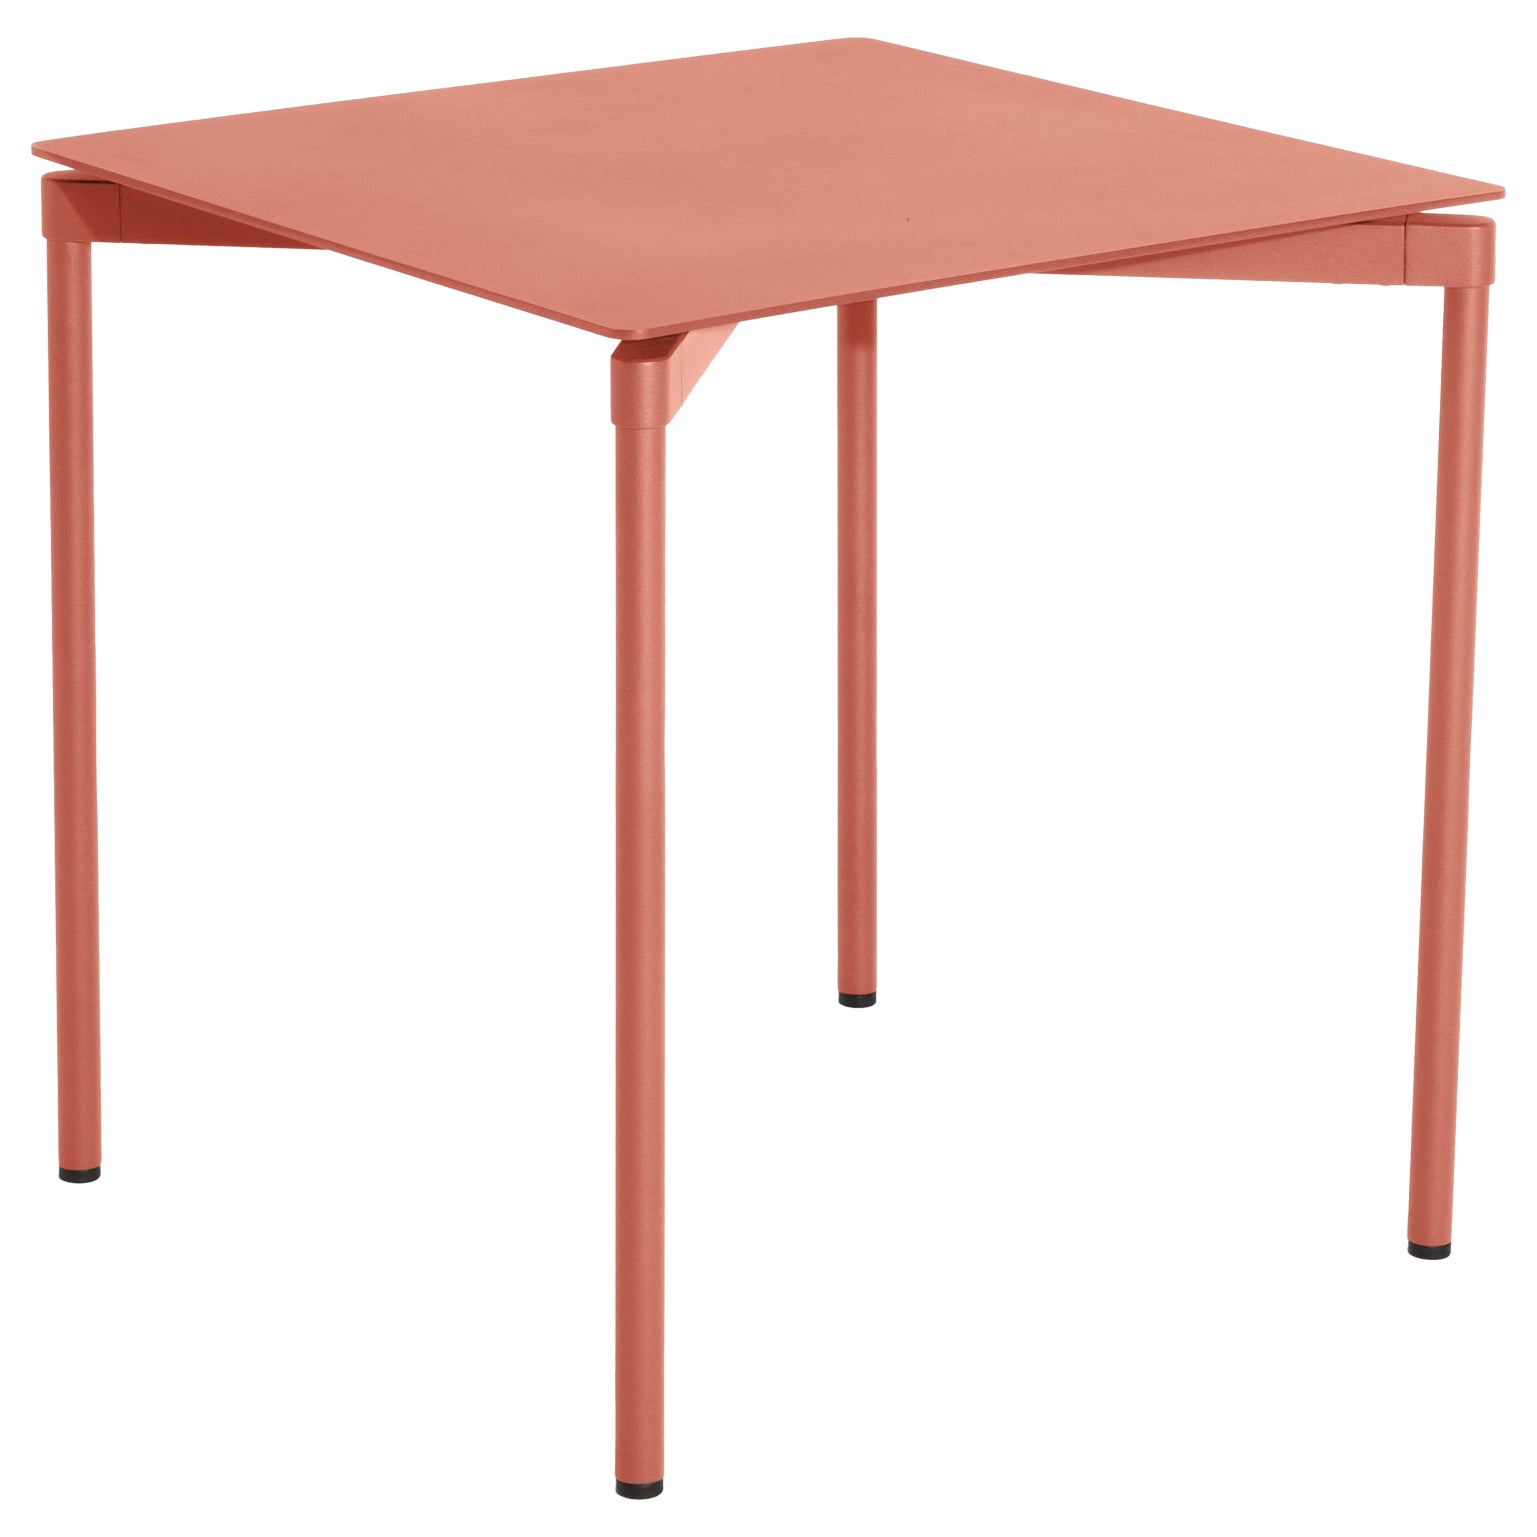 Petite Friture Fromme Square Table in Coral Aluminium by Tom Chung